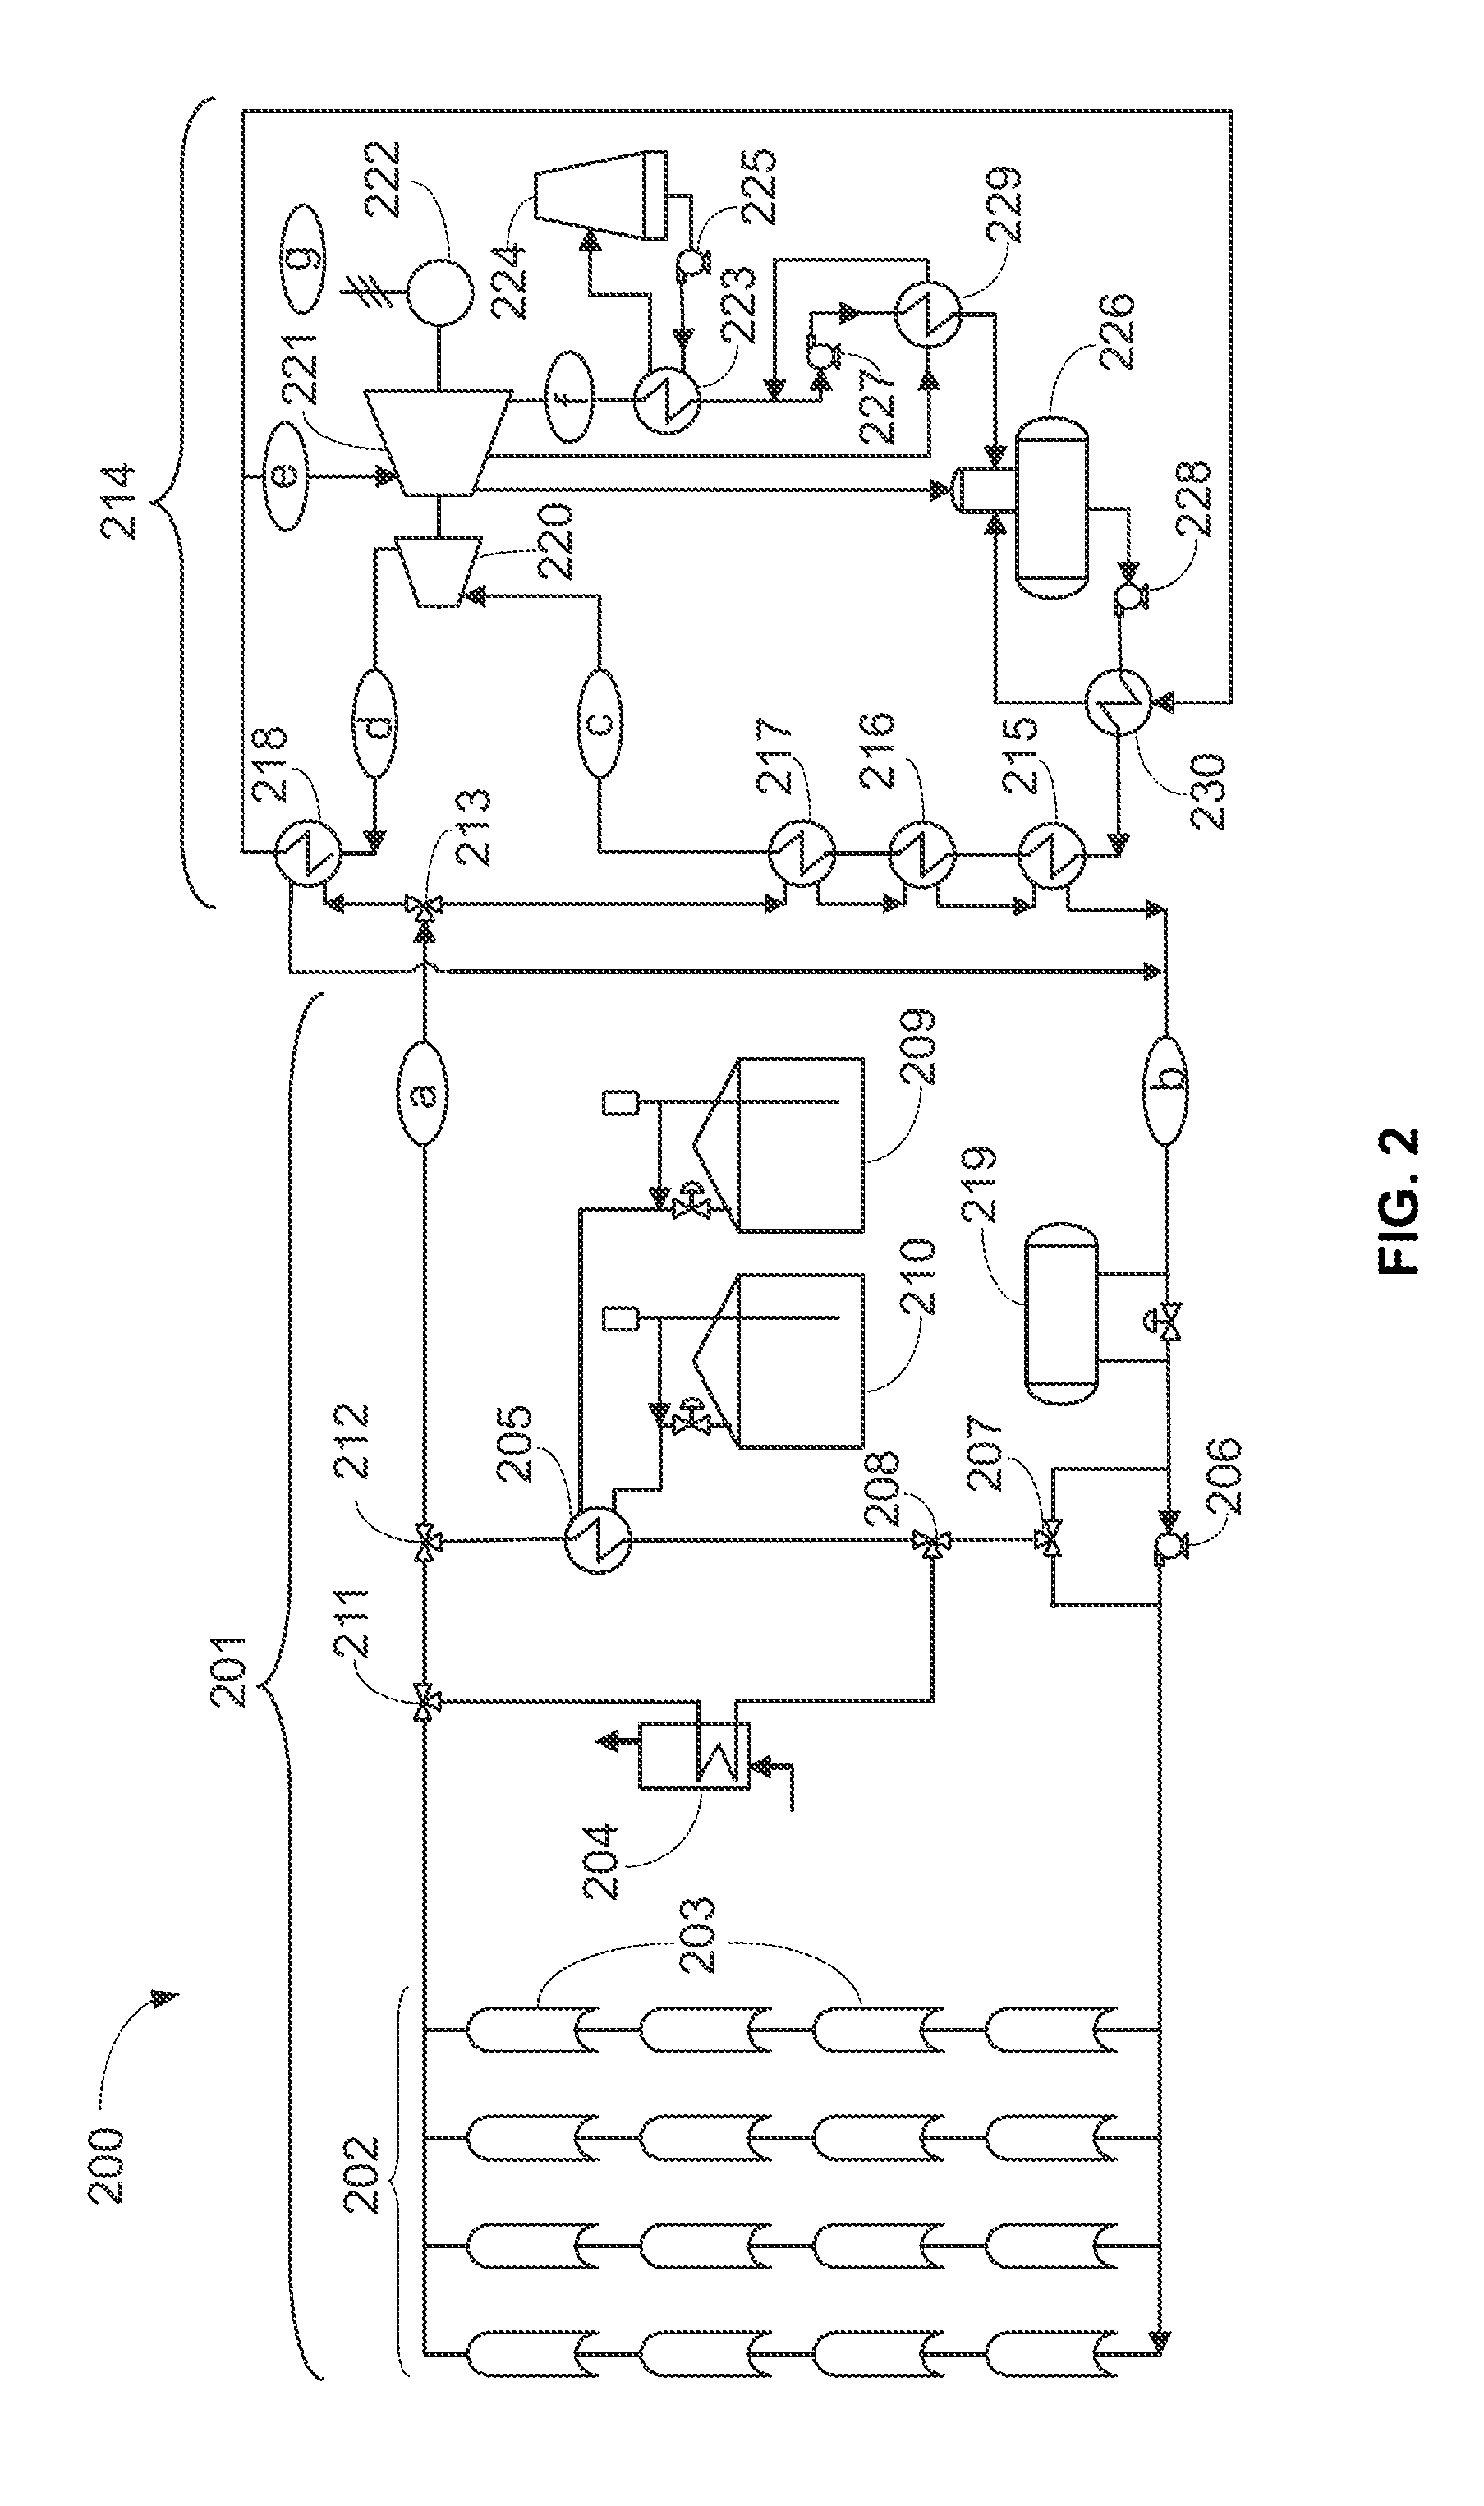 Process for producing superheated steam from a concentrating solar power plant